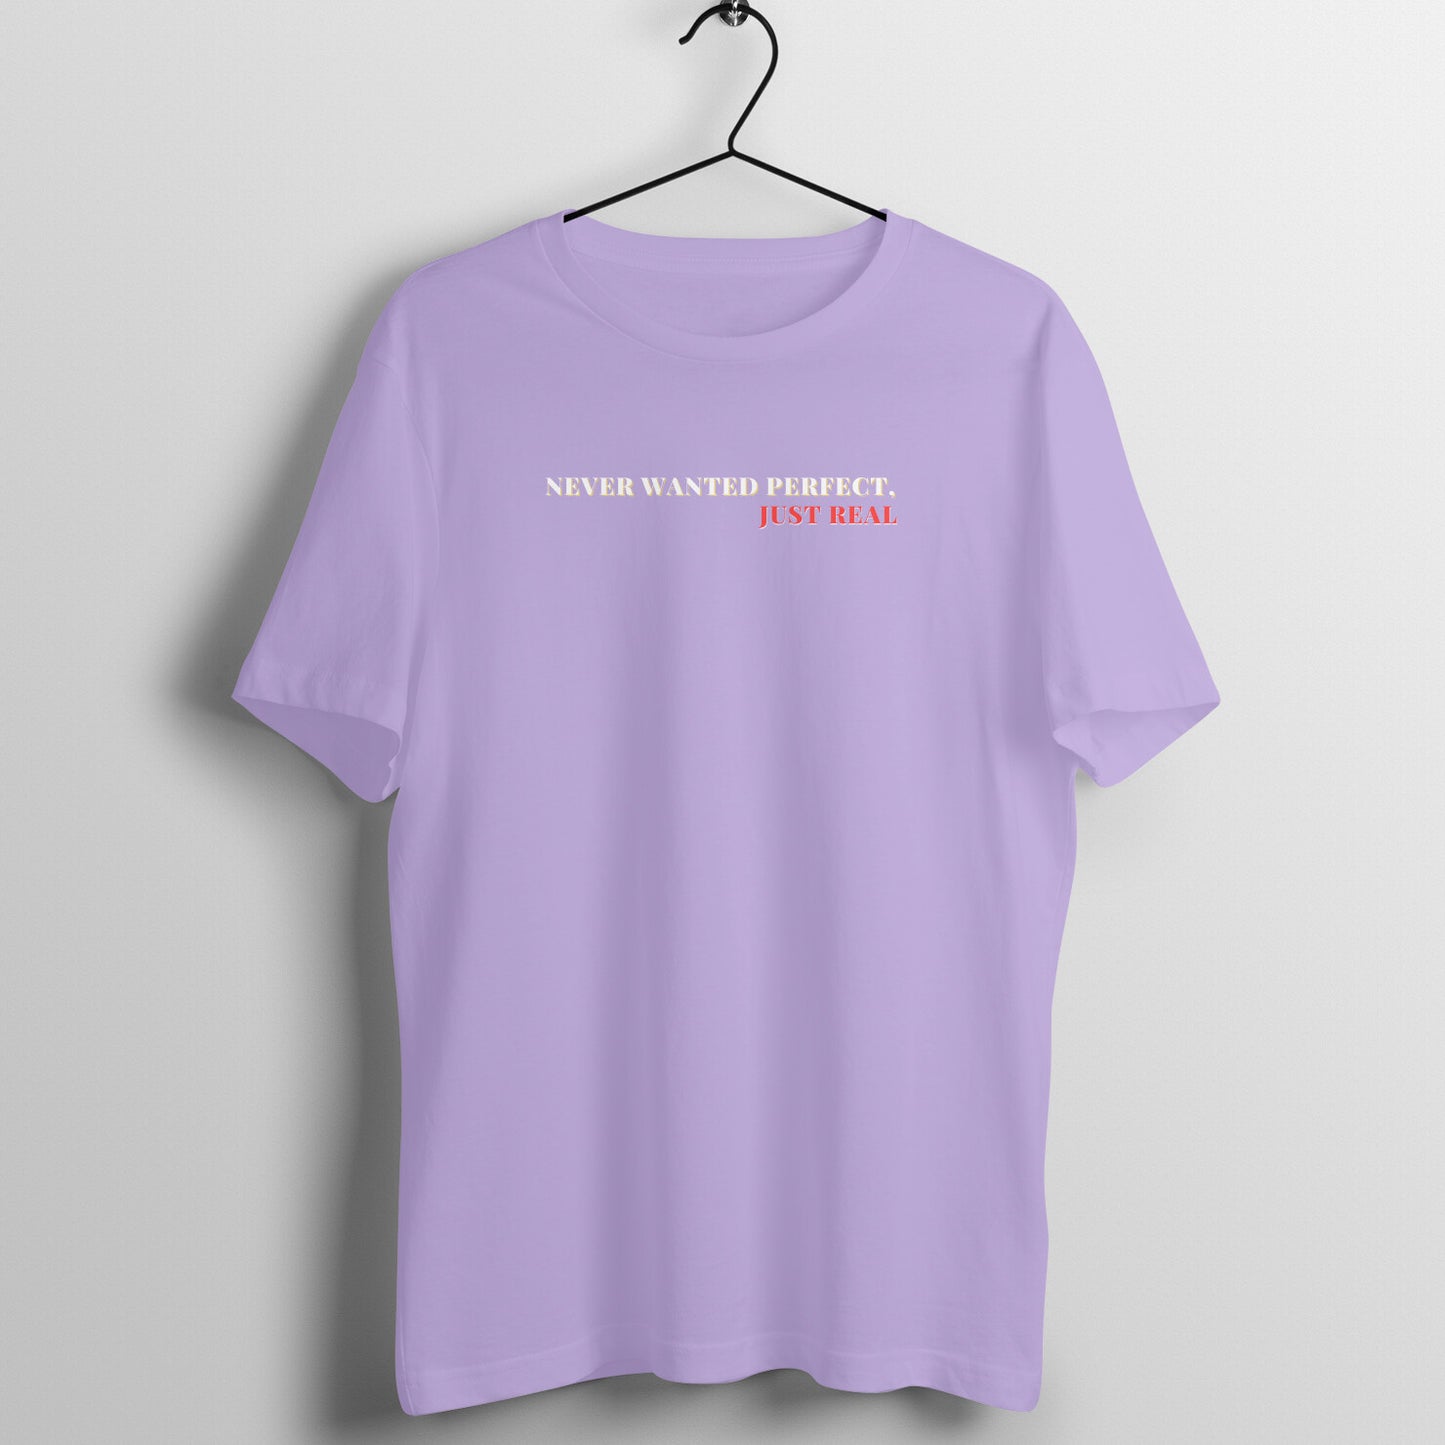 Never wanted perfect just real Unisex T-Shirt